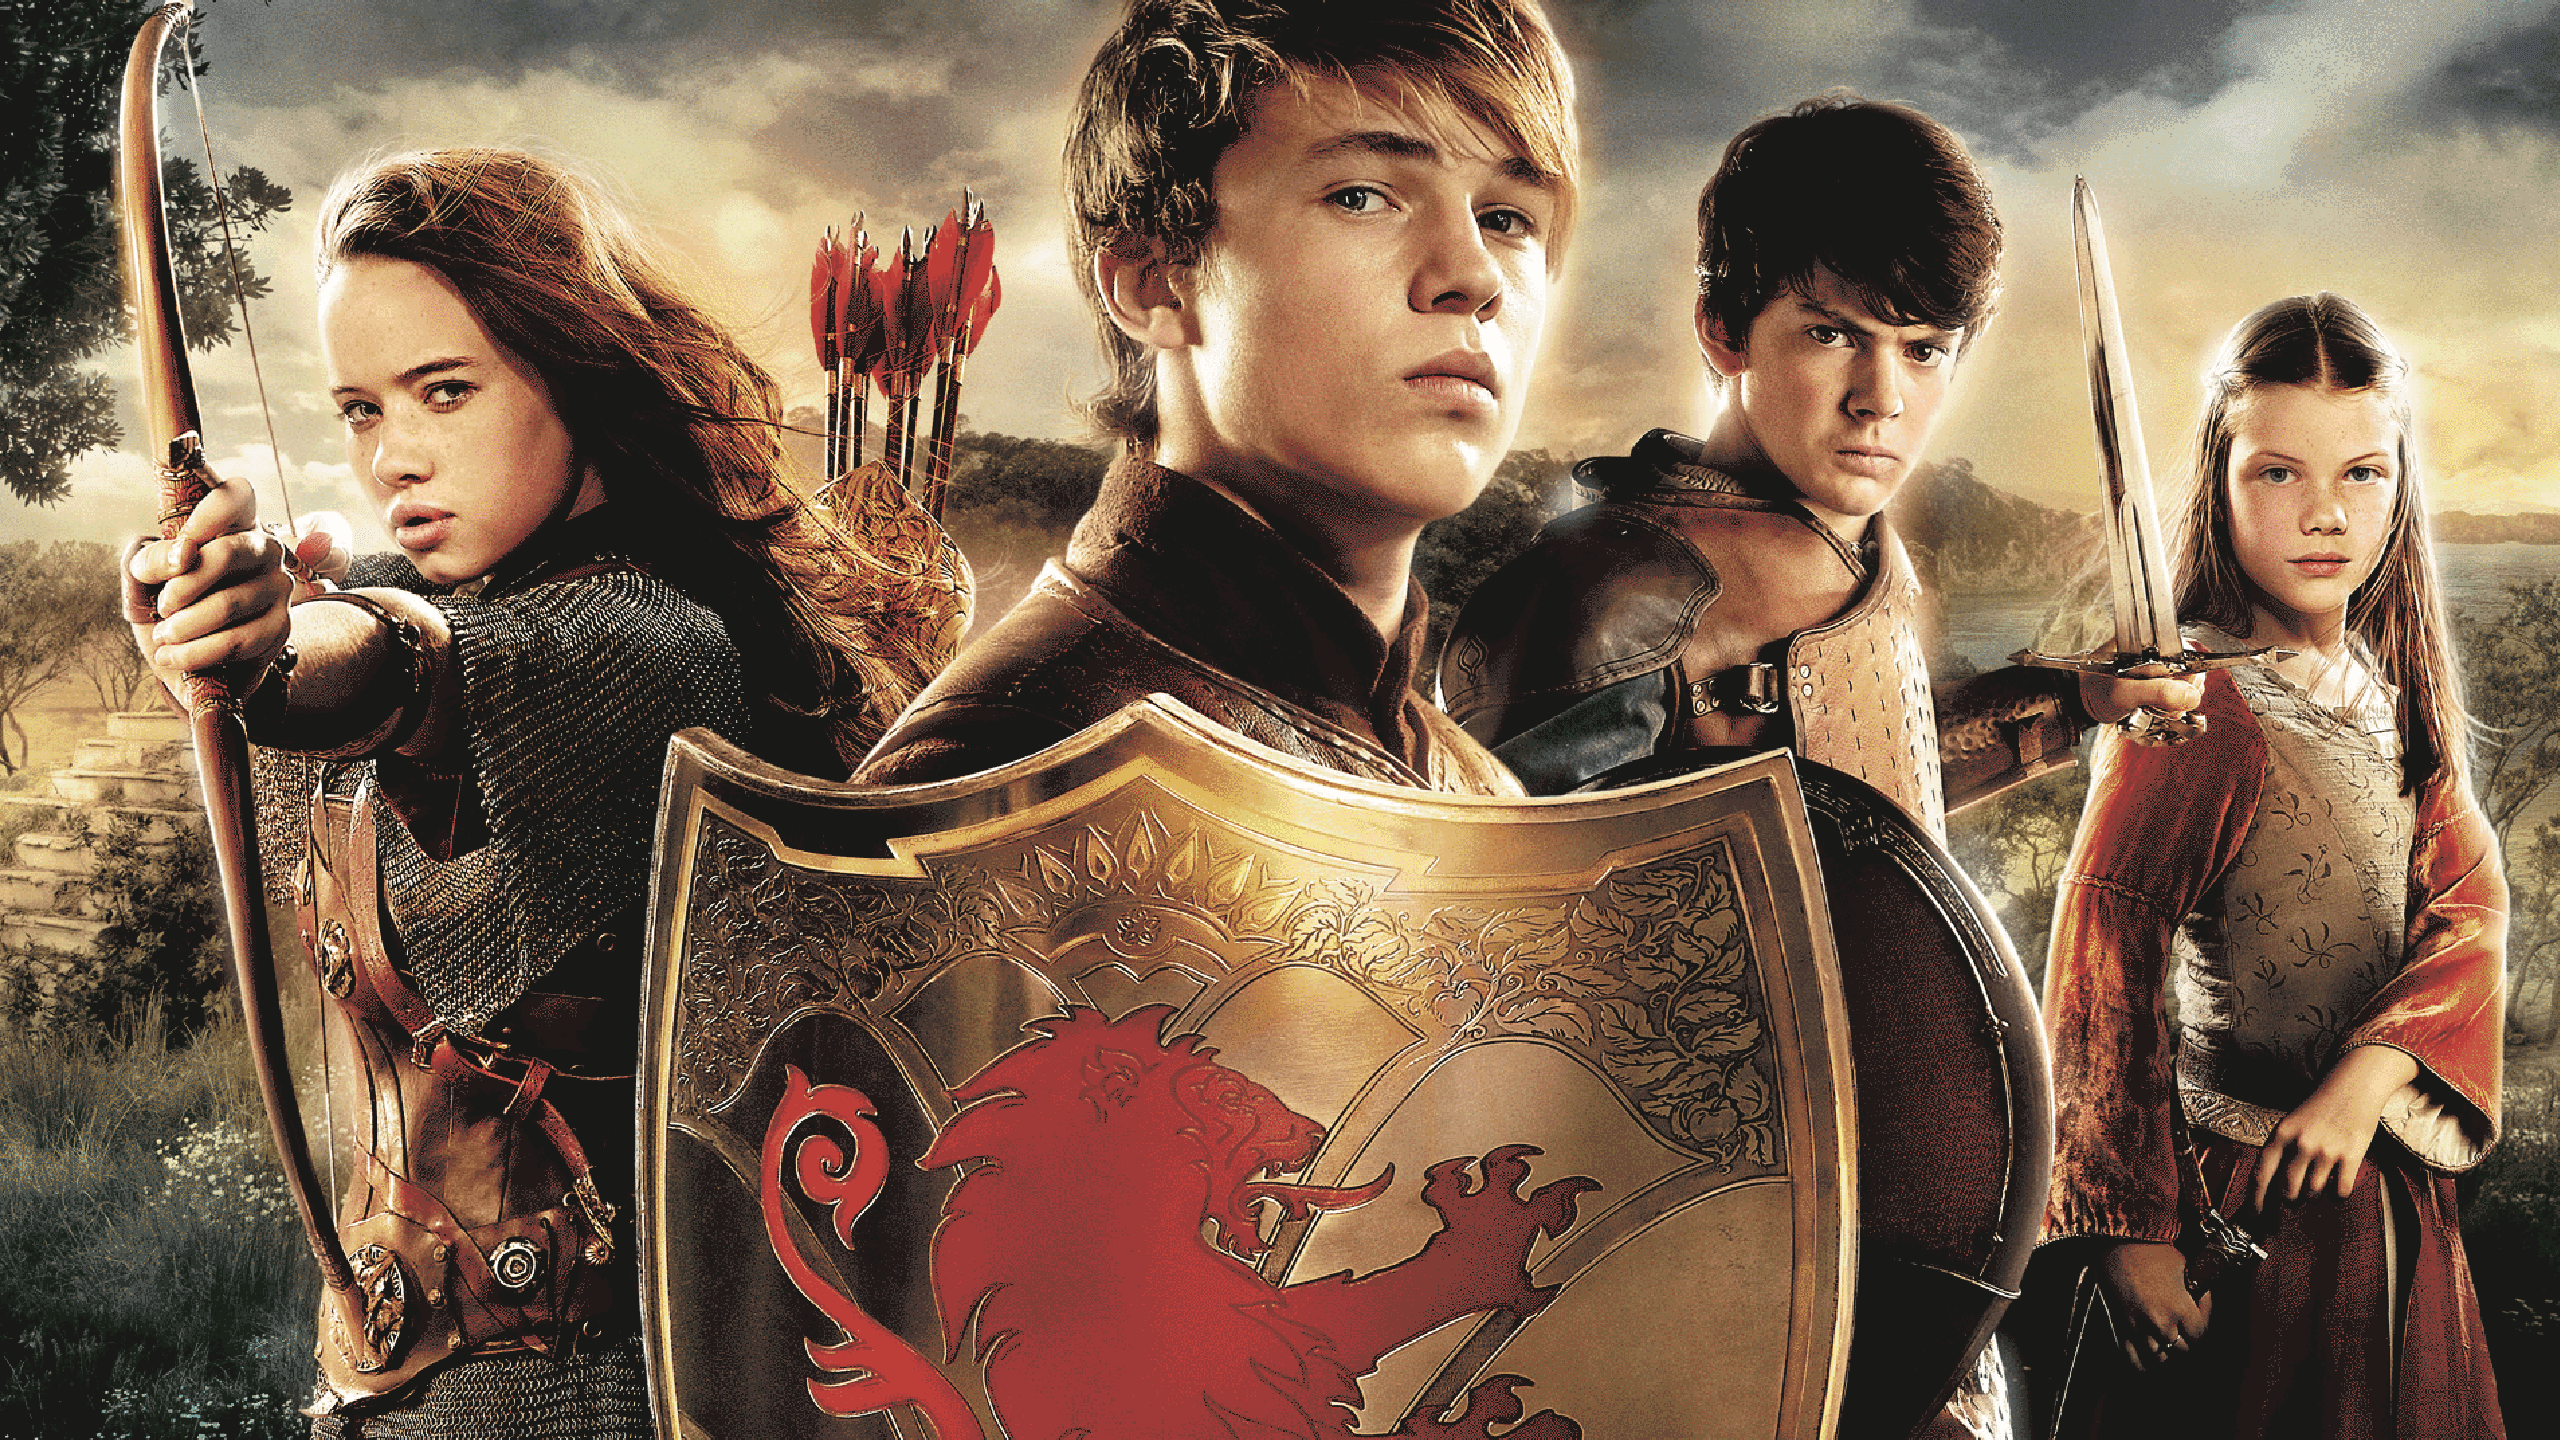 the chronicles of narnia 2 full movie online free